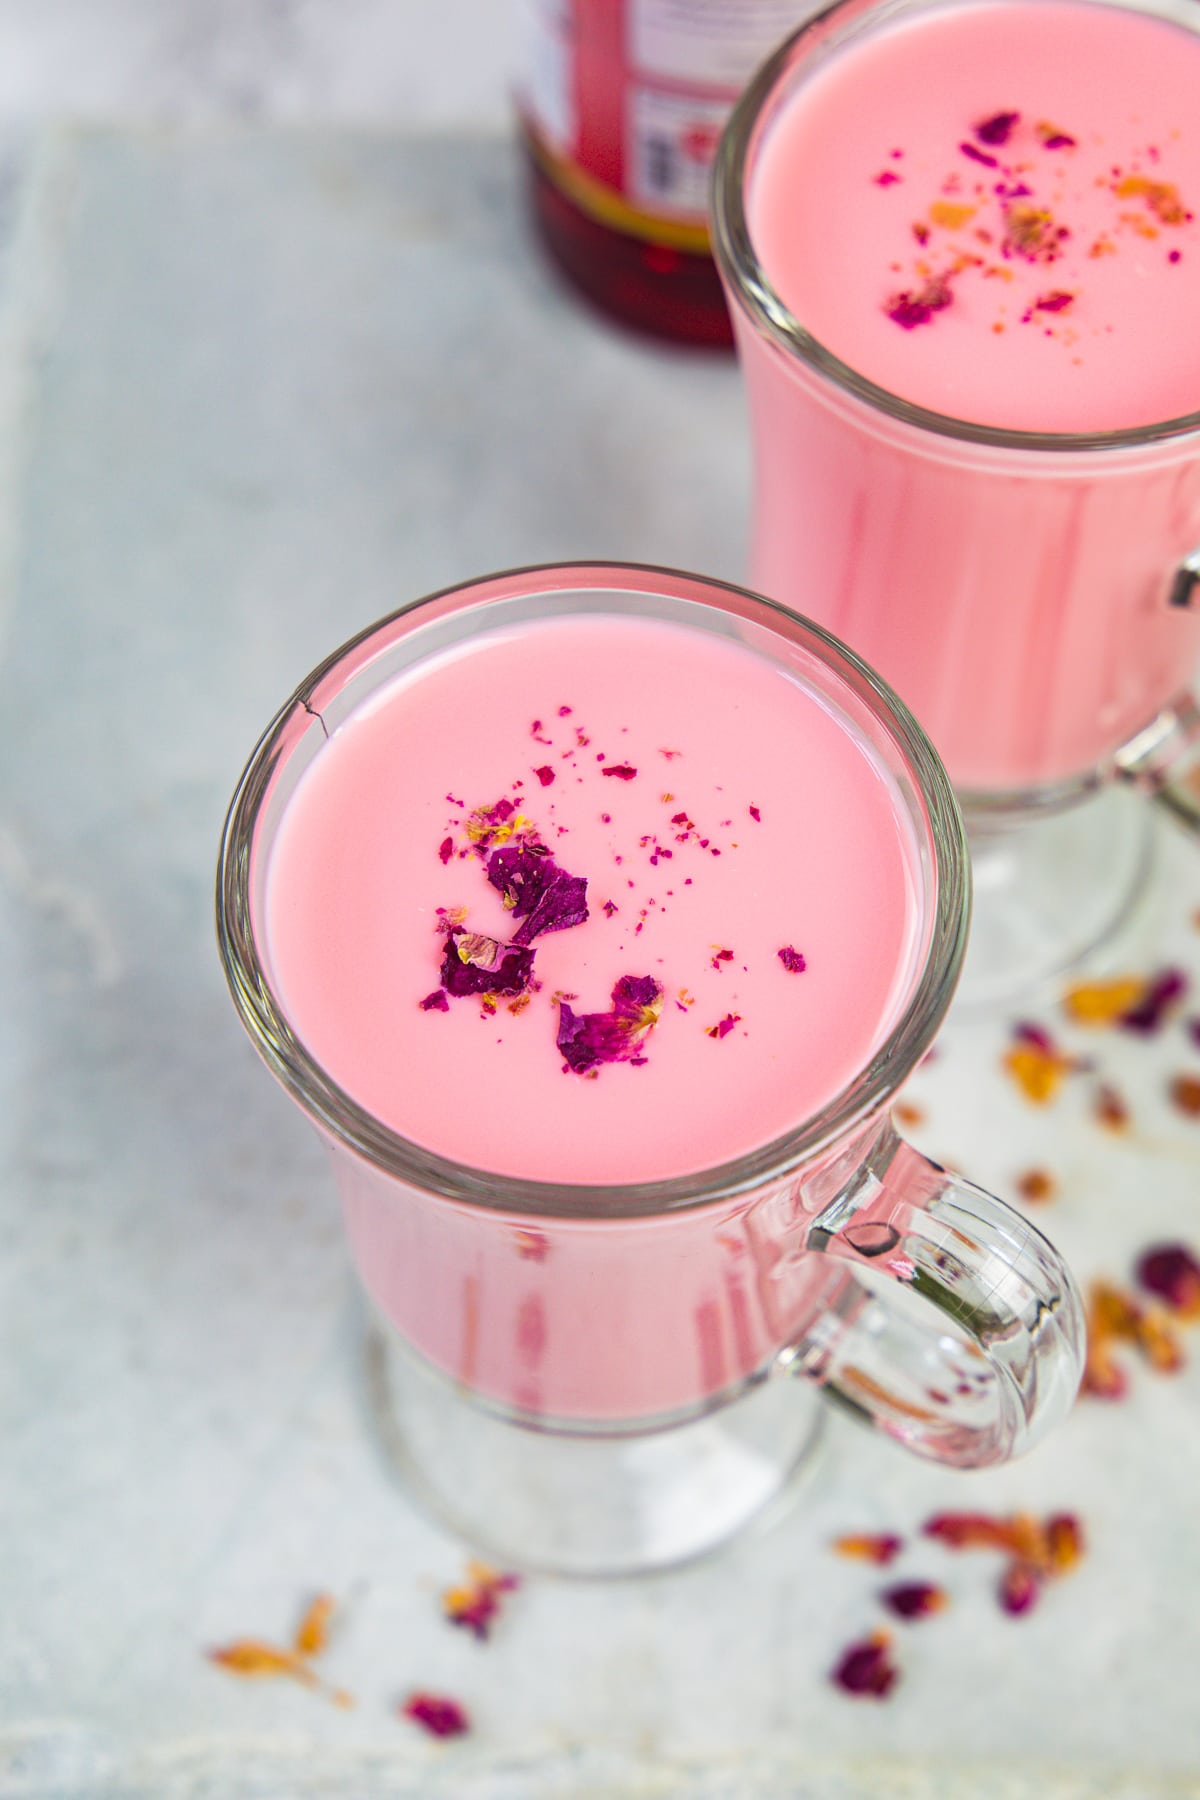 2 glasses of rose milk garnished with rose petals and few more petals on the side.